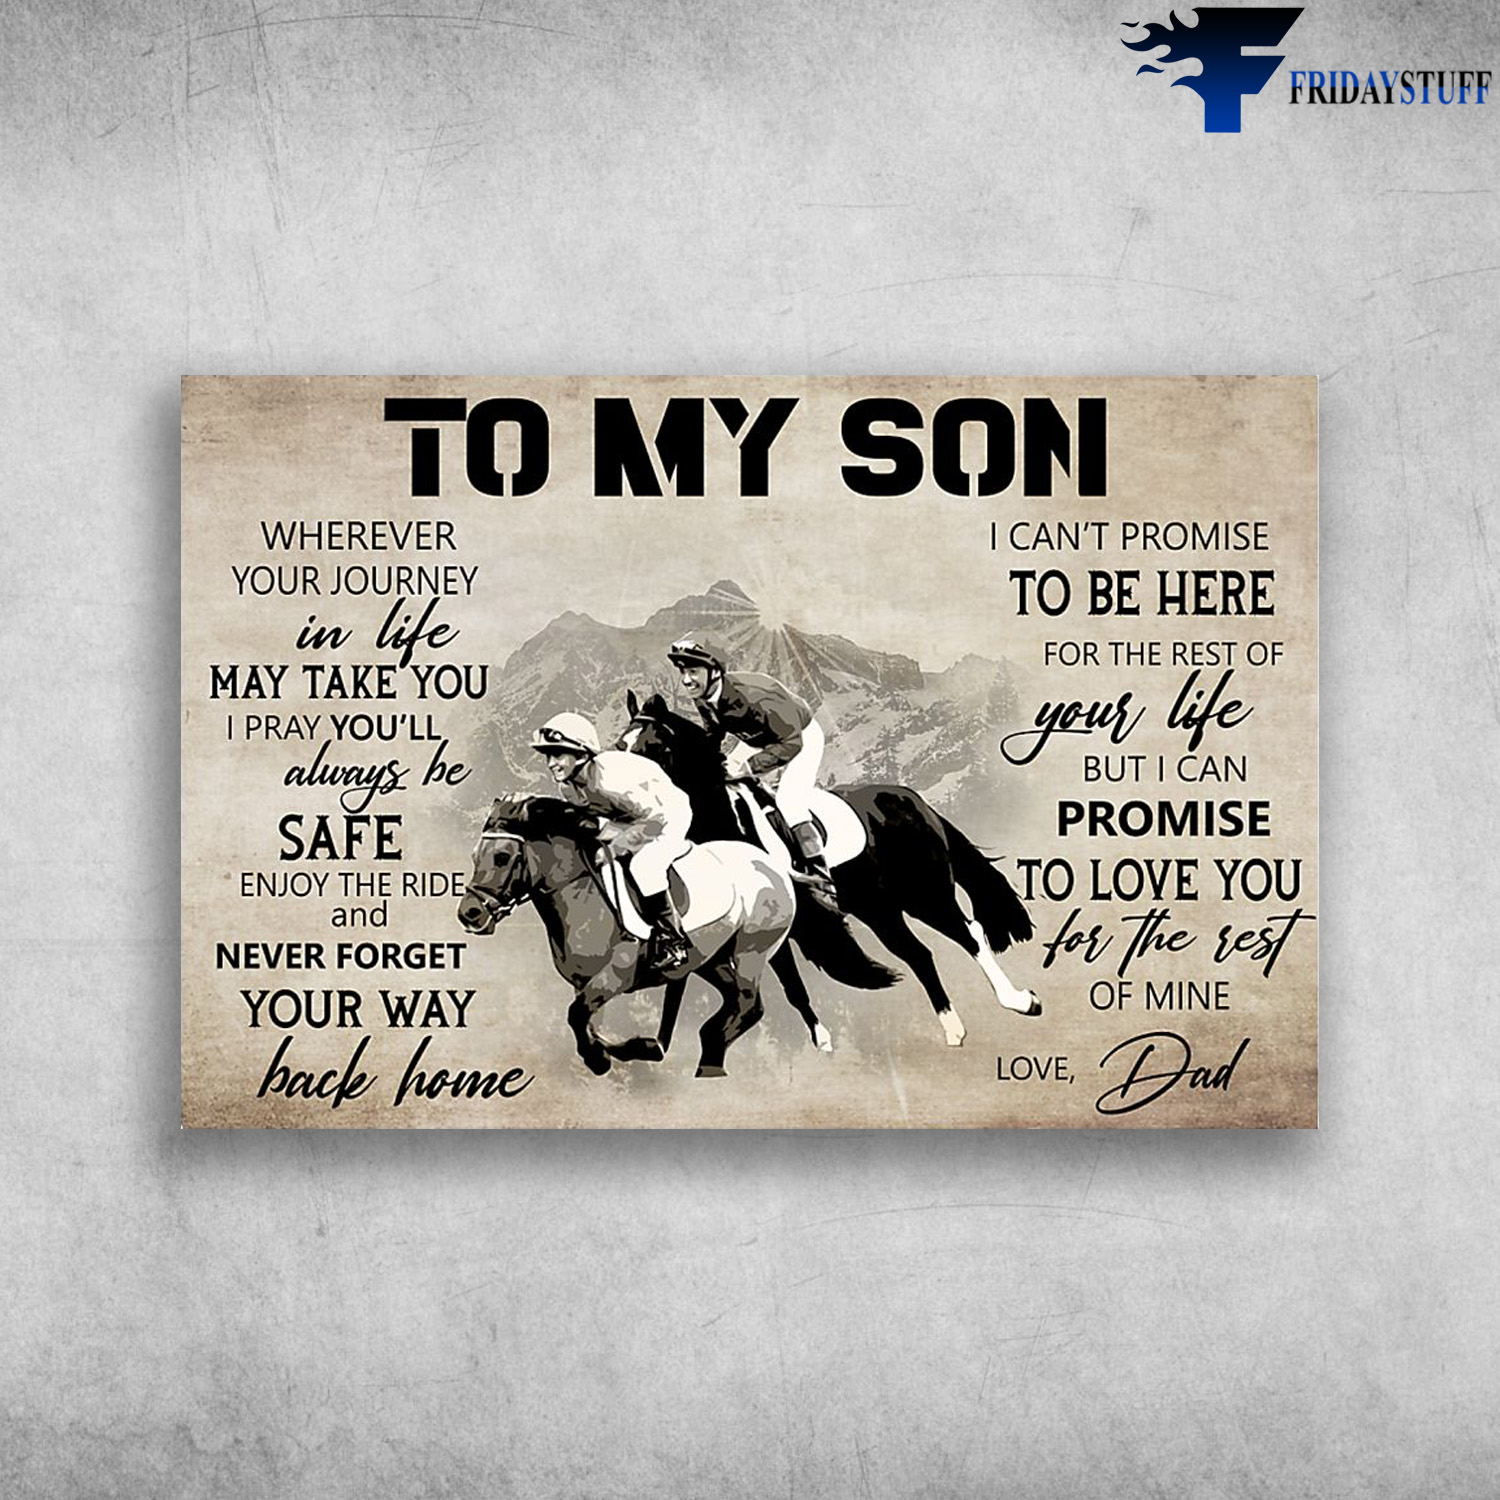 Horse Racing - To My Son, Wherever Your Journey In Life May Take You, I Pray You'll Always Be Safe Enjoy The Ride And Never Forget Your Way Back Home, I Can't Promise To Be Here, For The Rest Of Your Life